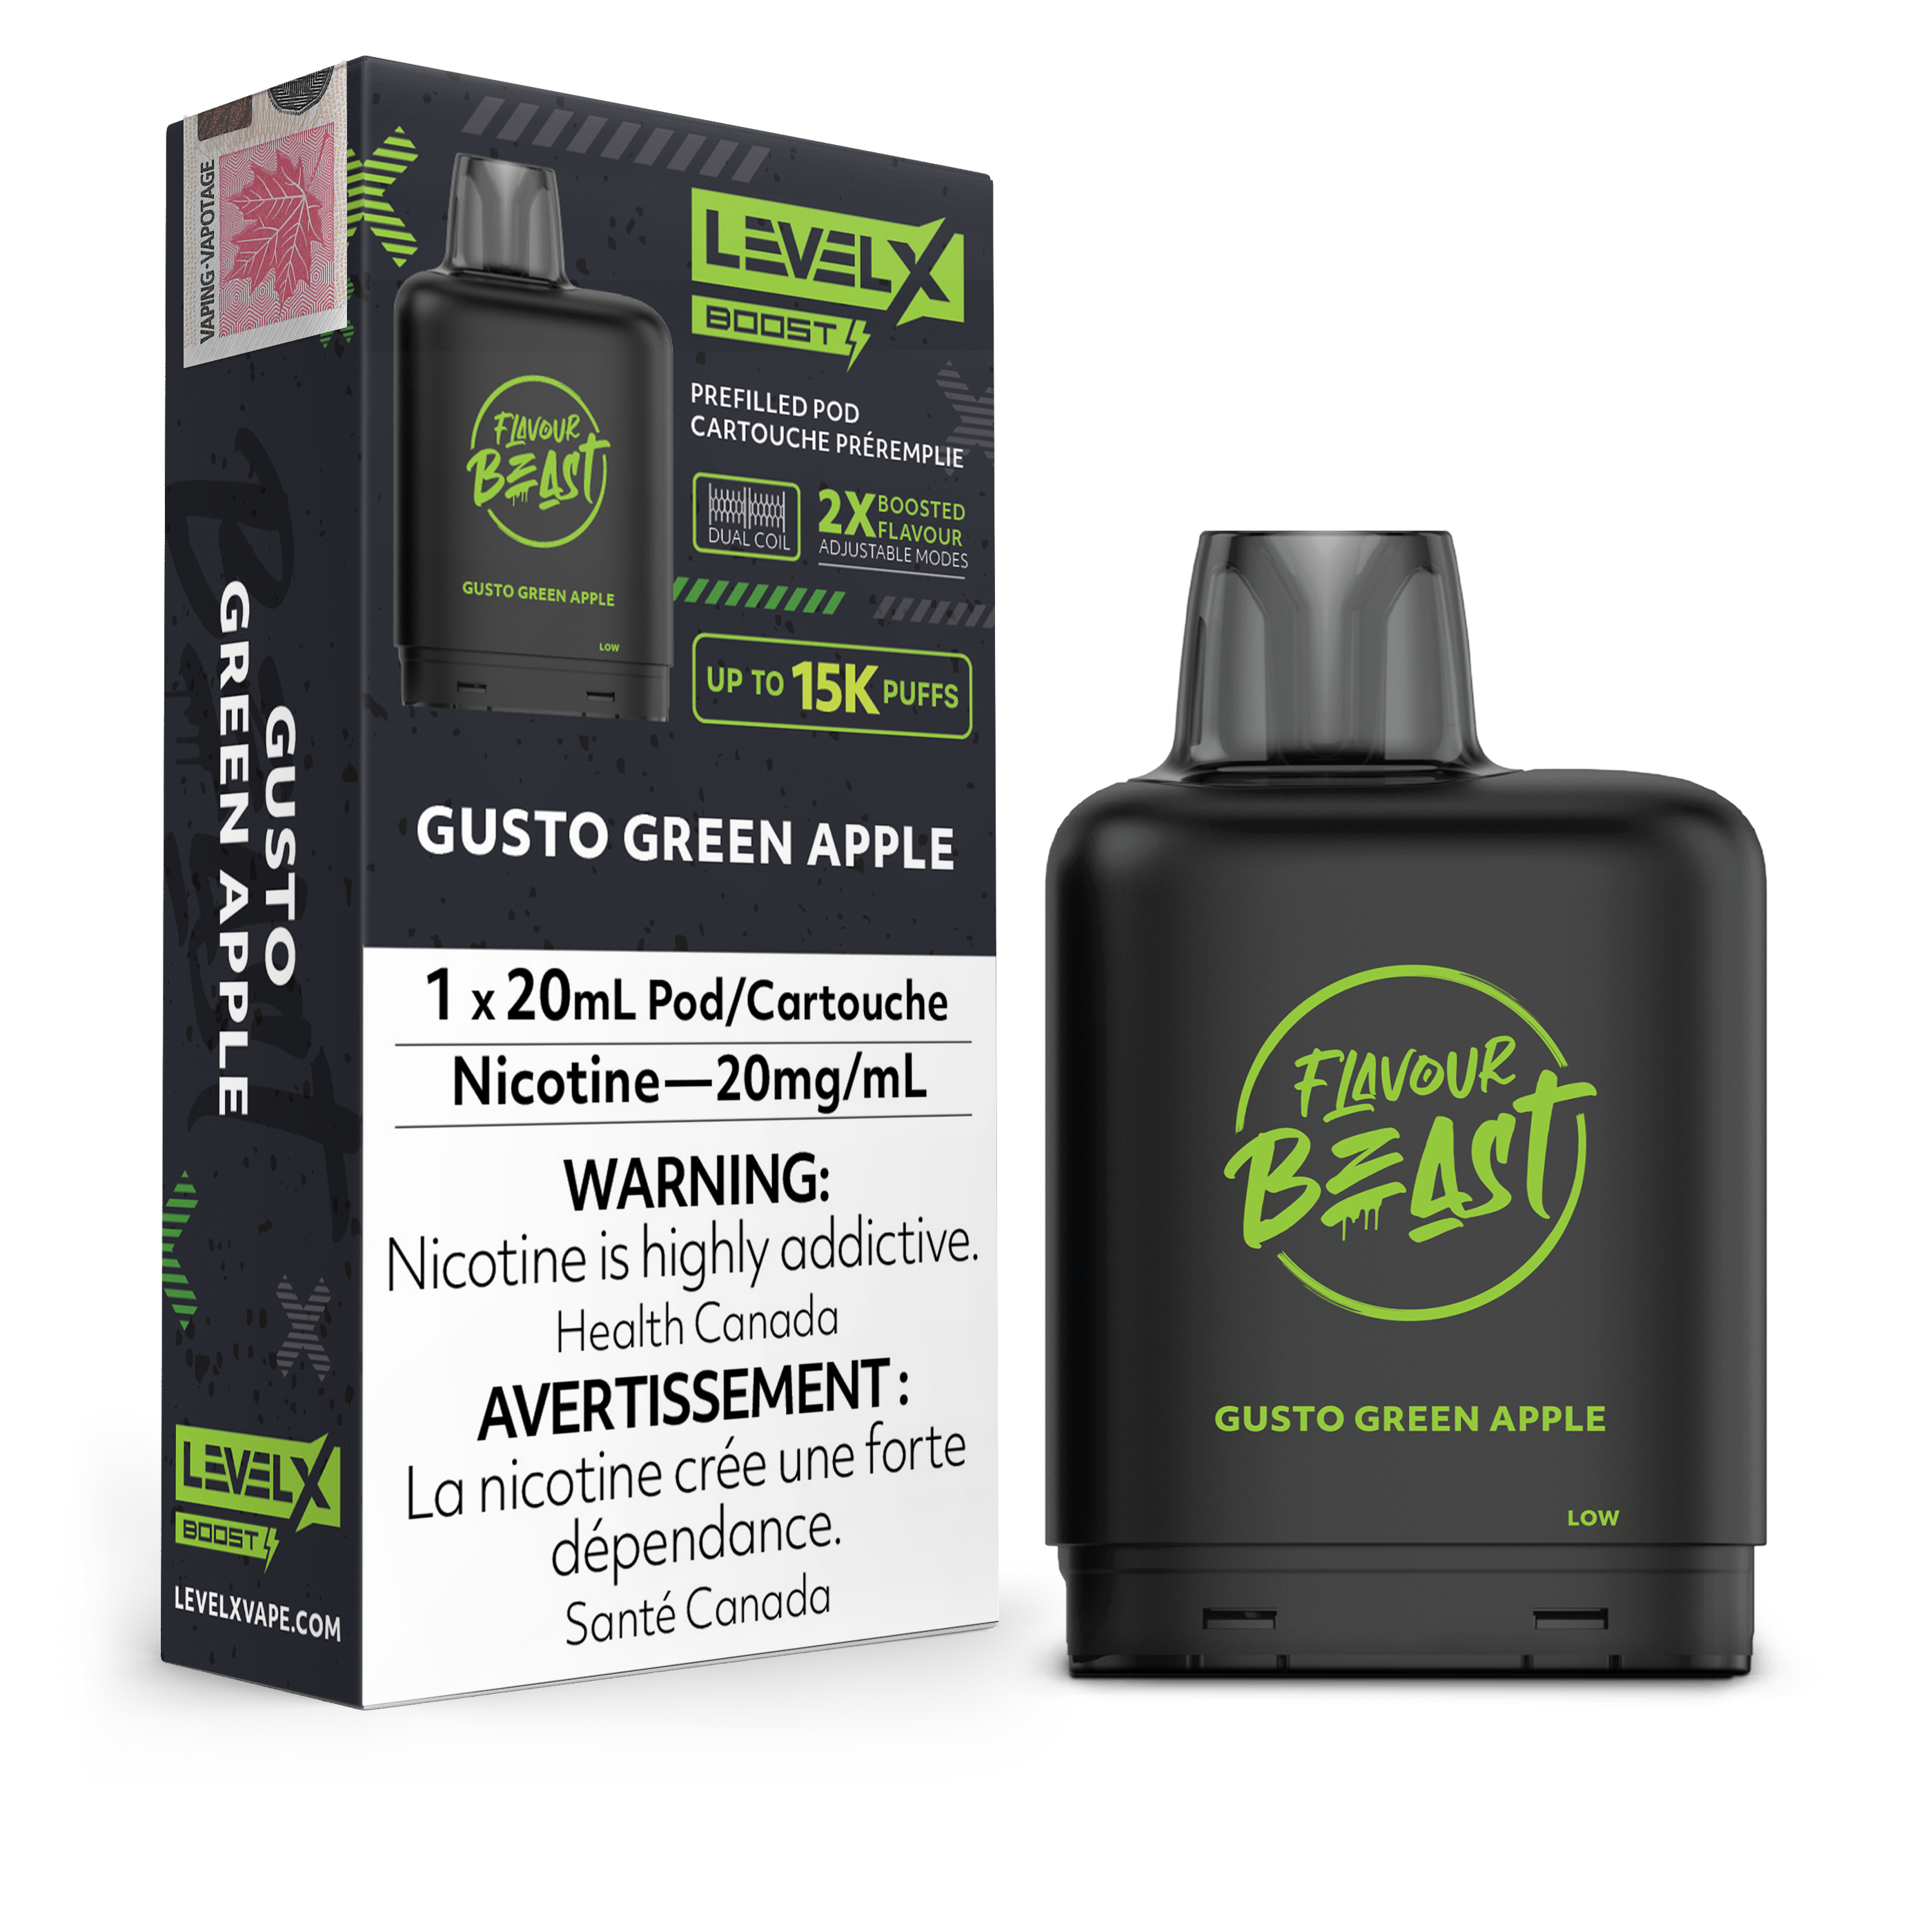 LEVEL X BOOST FLAVOUR BEAST Green Apple 20MG